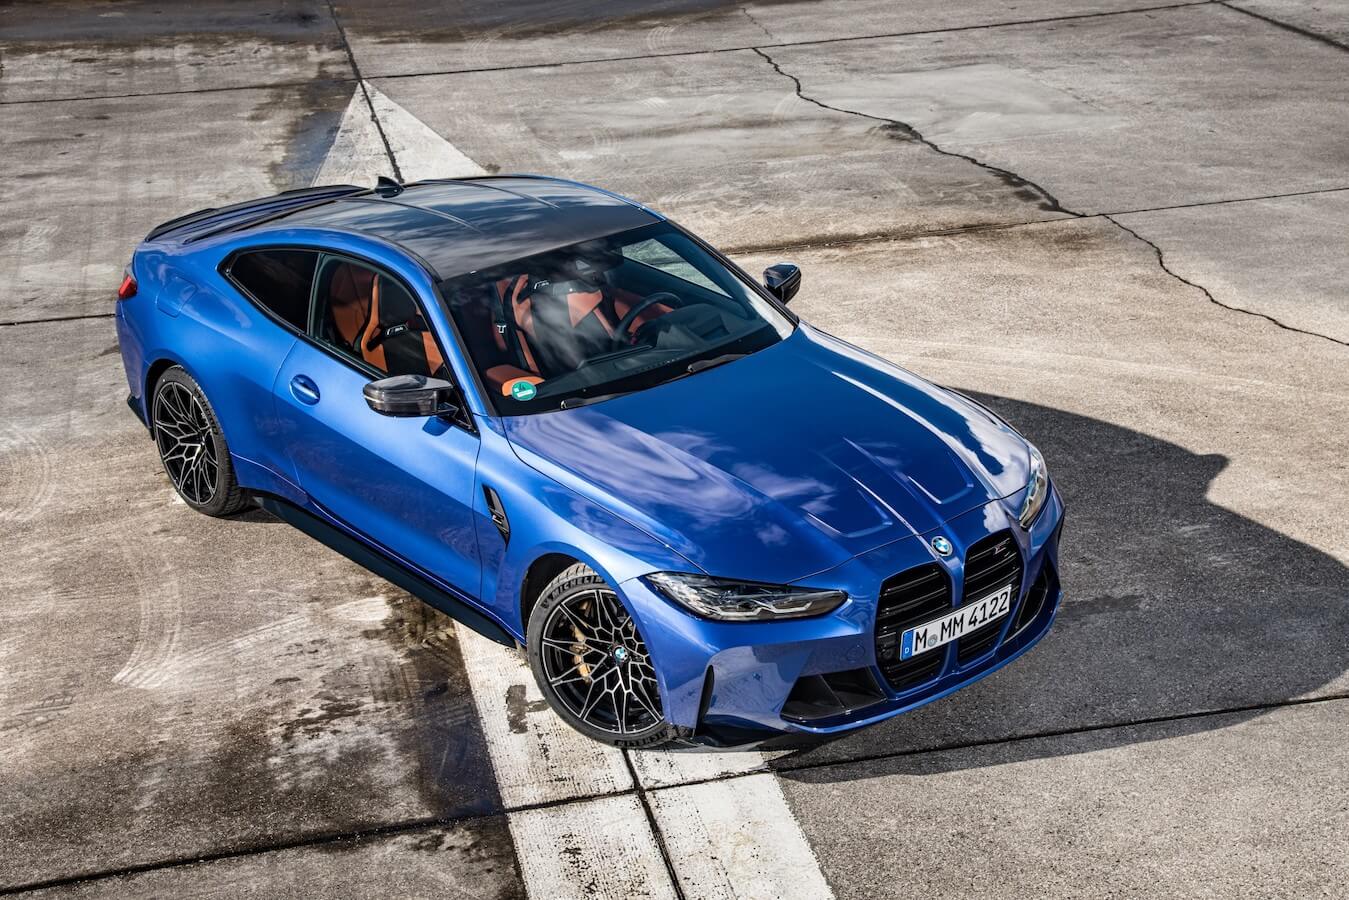 Overhead shot of blue 2023 BMW M4 parked on a racetrack.